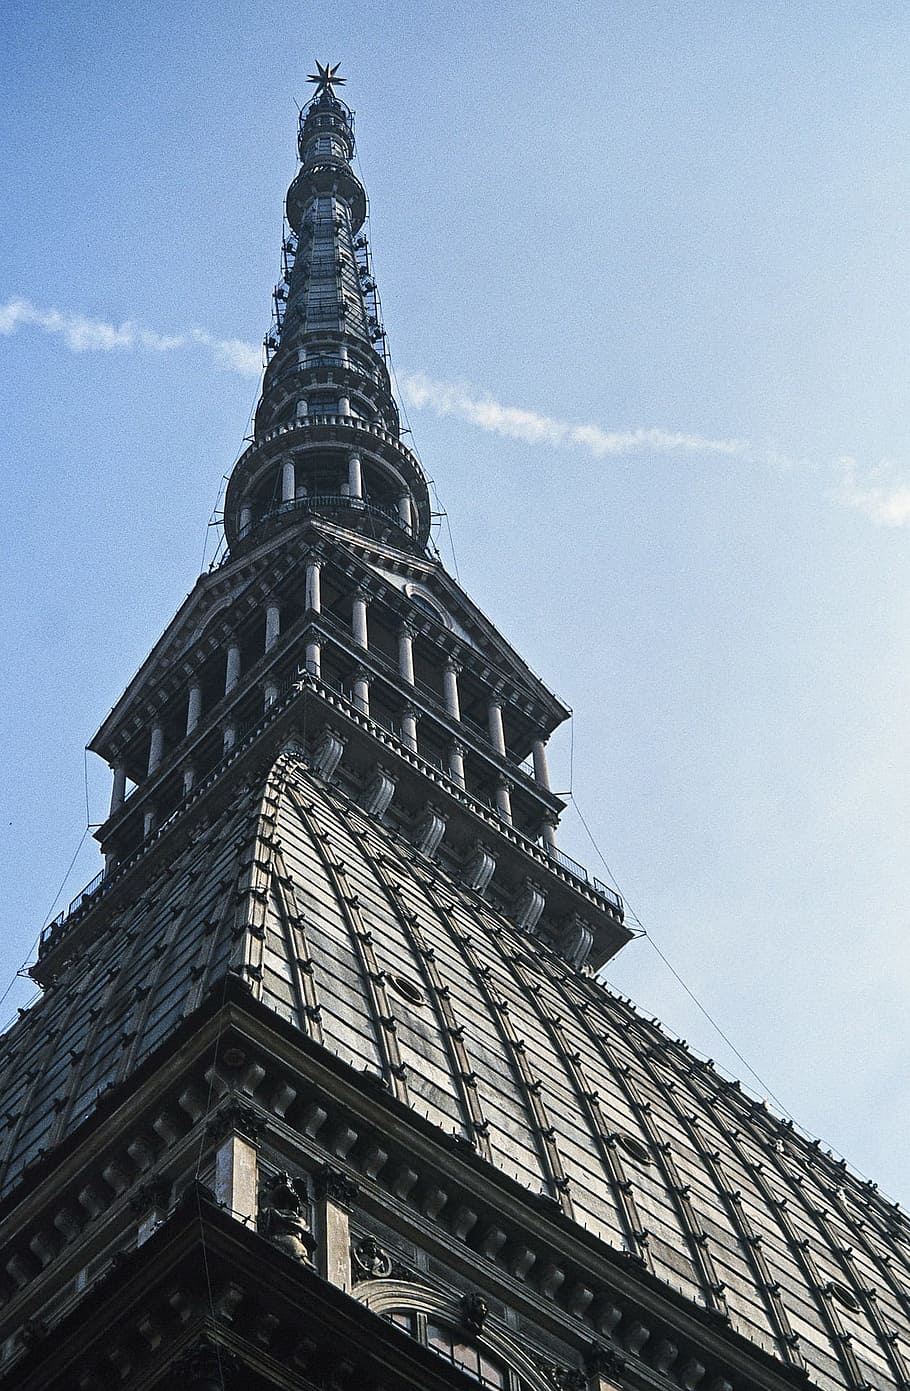 turin, building, tower, construction, architecture, high, height, built structure, building exterior, sky